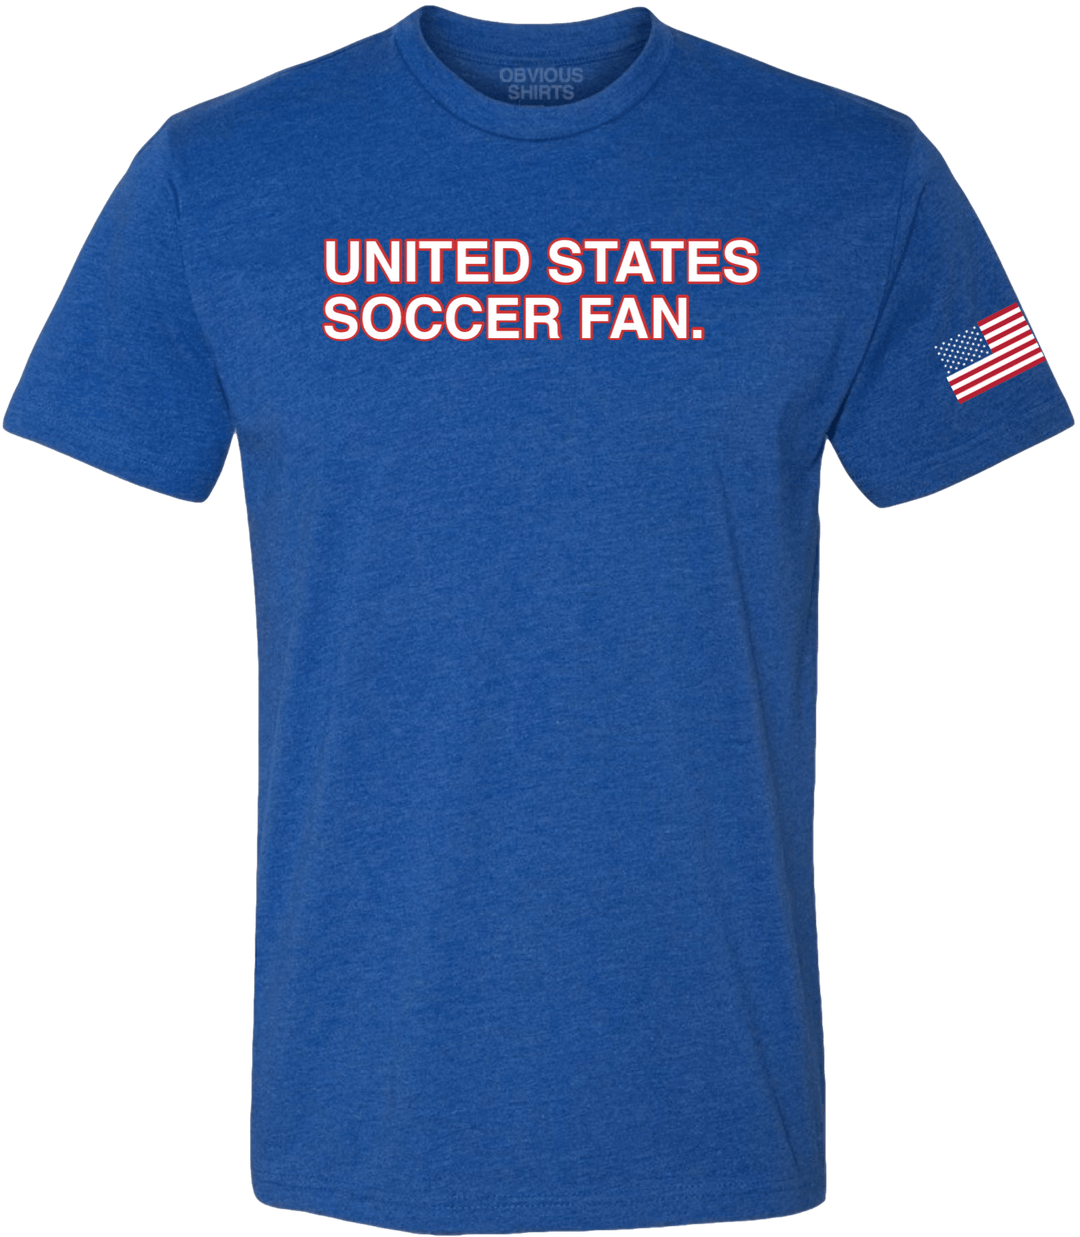 UNITED STATES SOCCER FAN. - OBVIOUS SHIRTS